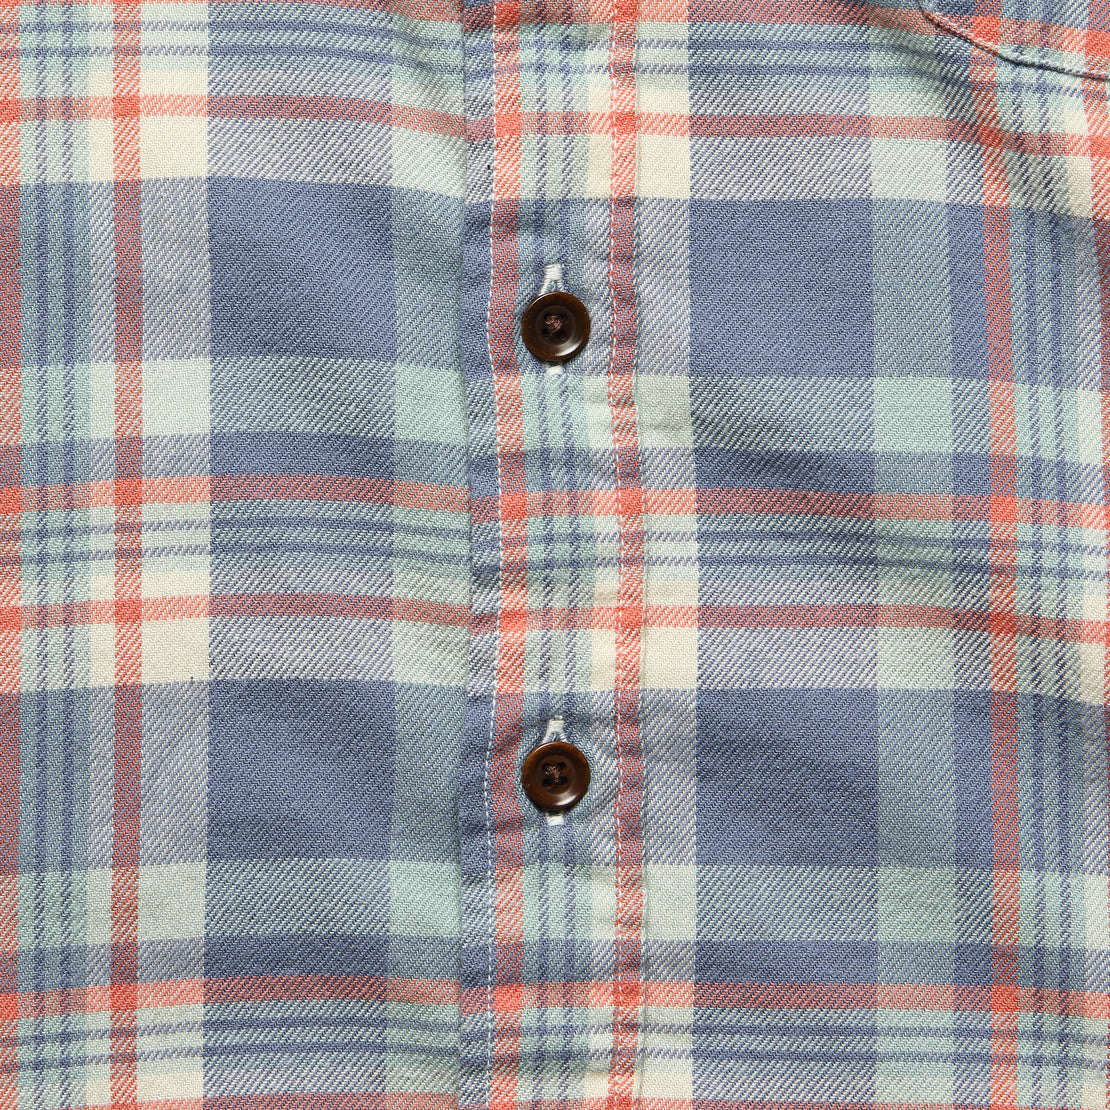 Stretch Seaview Shirt - Blue/Cream/Orange - Faherty - STAG Provisions - Tops - L/S Woven - Plaid